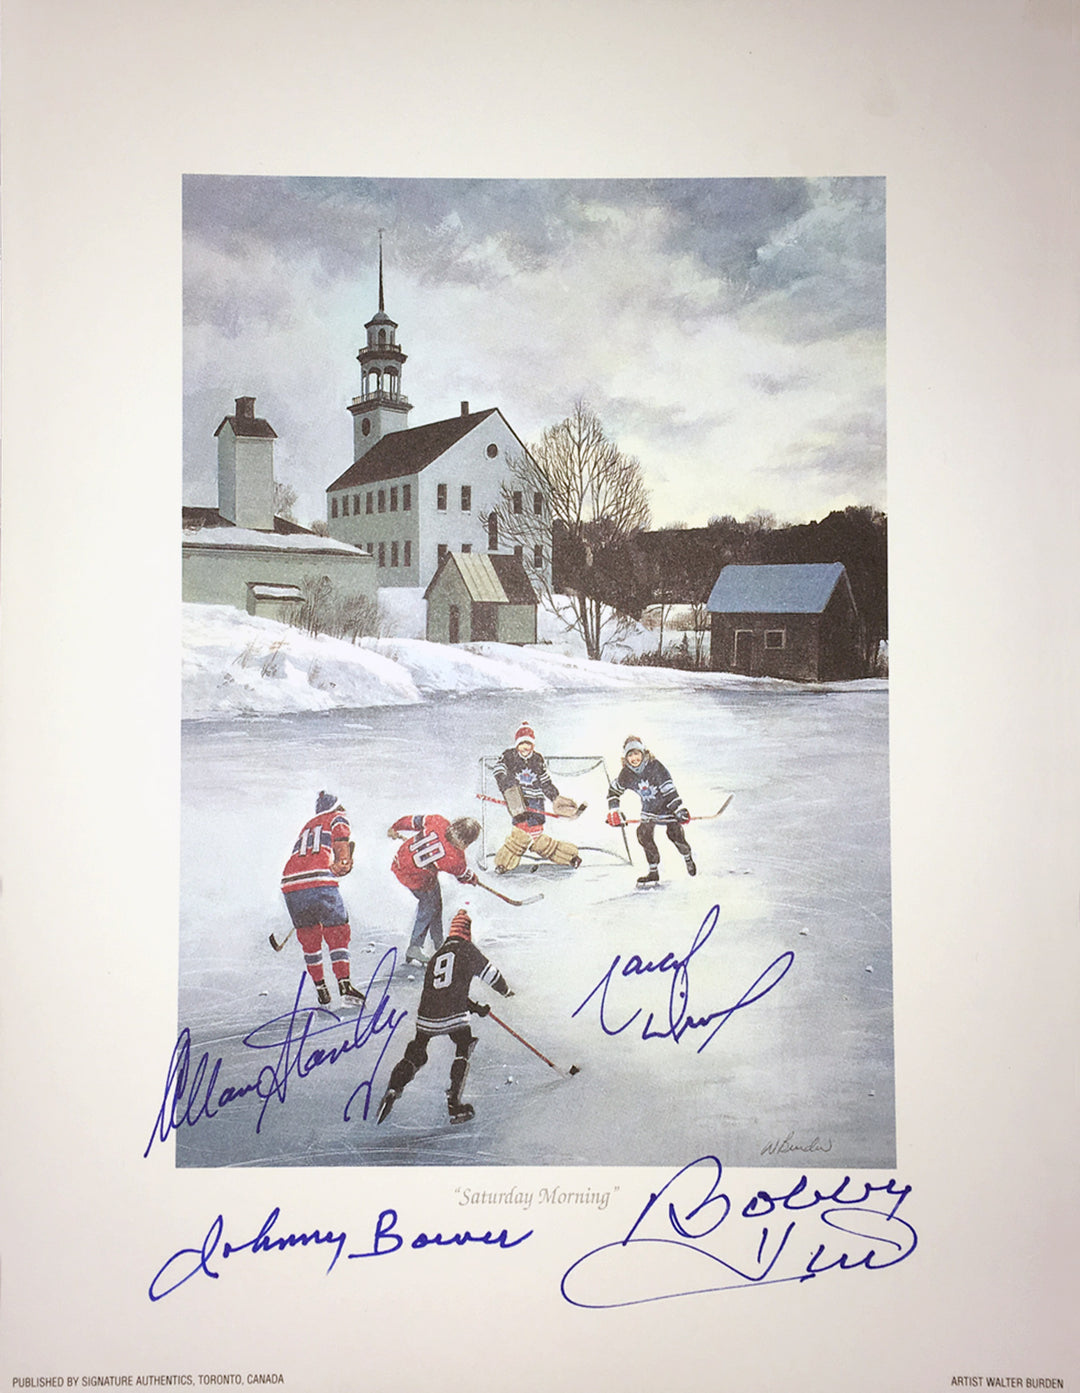 Signed J. Bower, B. Hull, A. Stanley, M. Dionne Lithograph Hhof, Toronto Maple Leafs, Chicago Blackhawks, LA Kings, NHL, Hockey, Autographed, Signed, AALCH31355